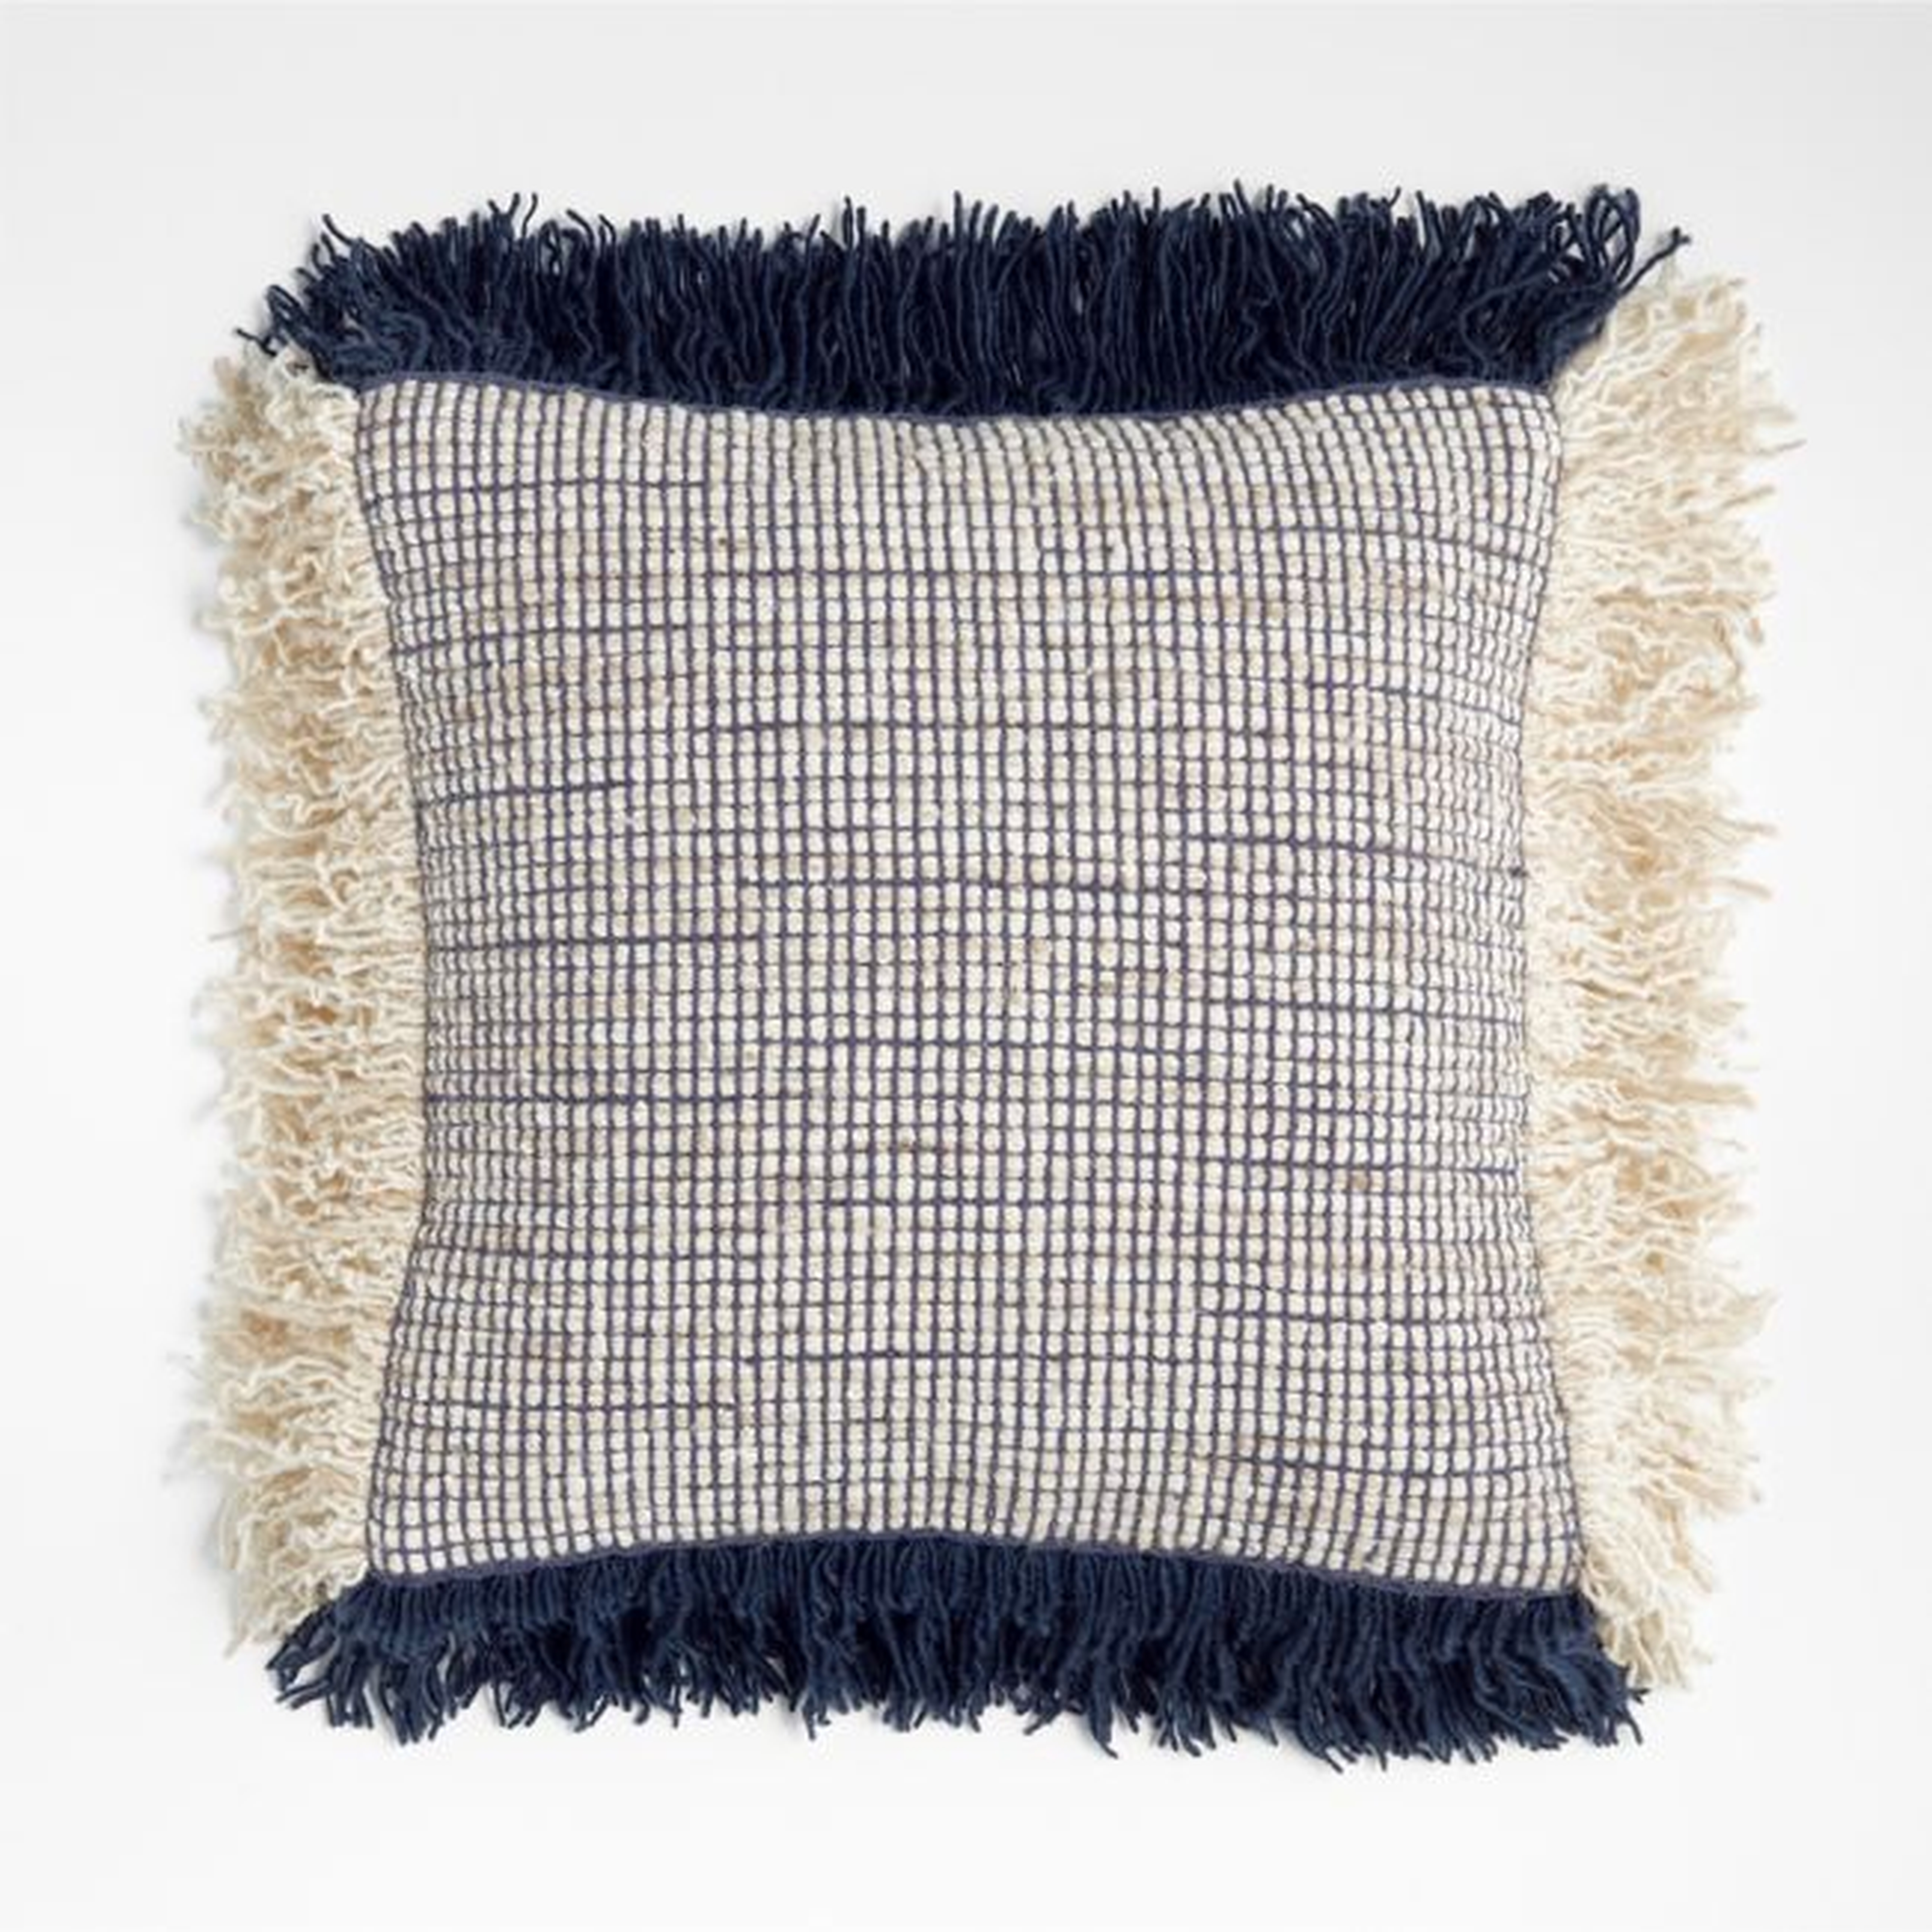 Guthrie 18"x18" Navy Fringe Throw Pillow Cover - Crate and Barrel